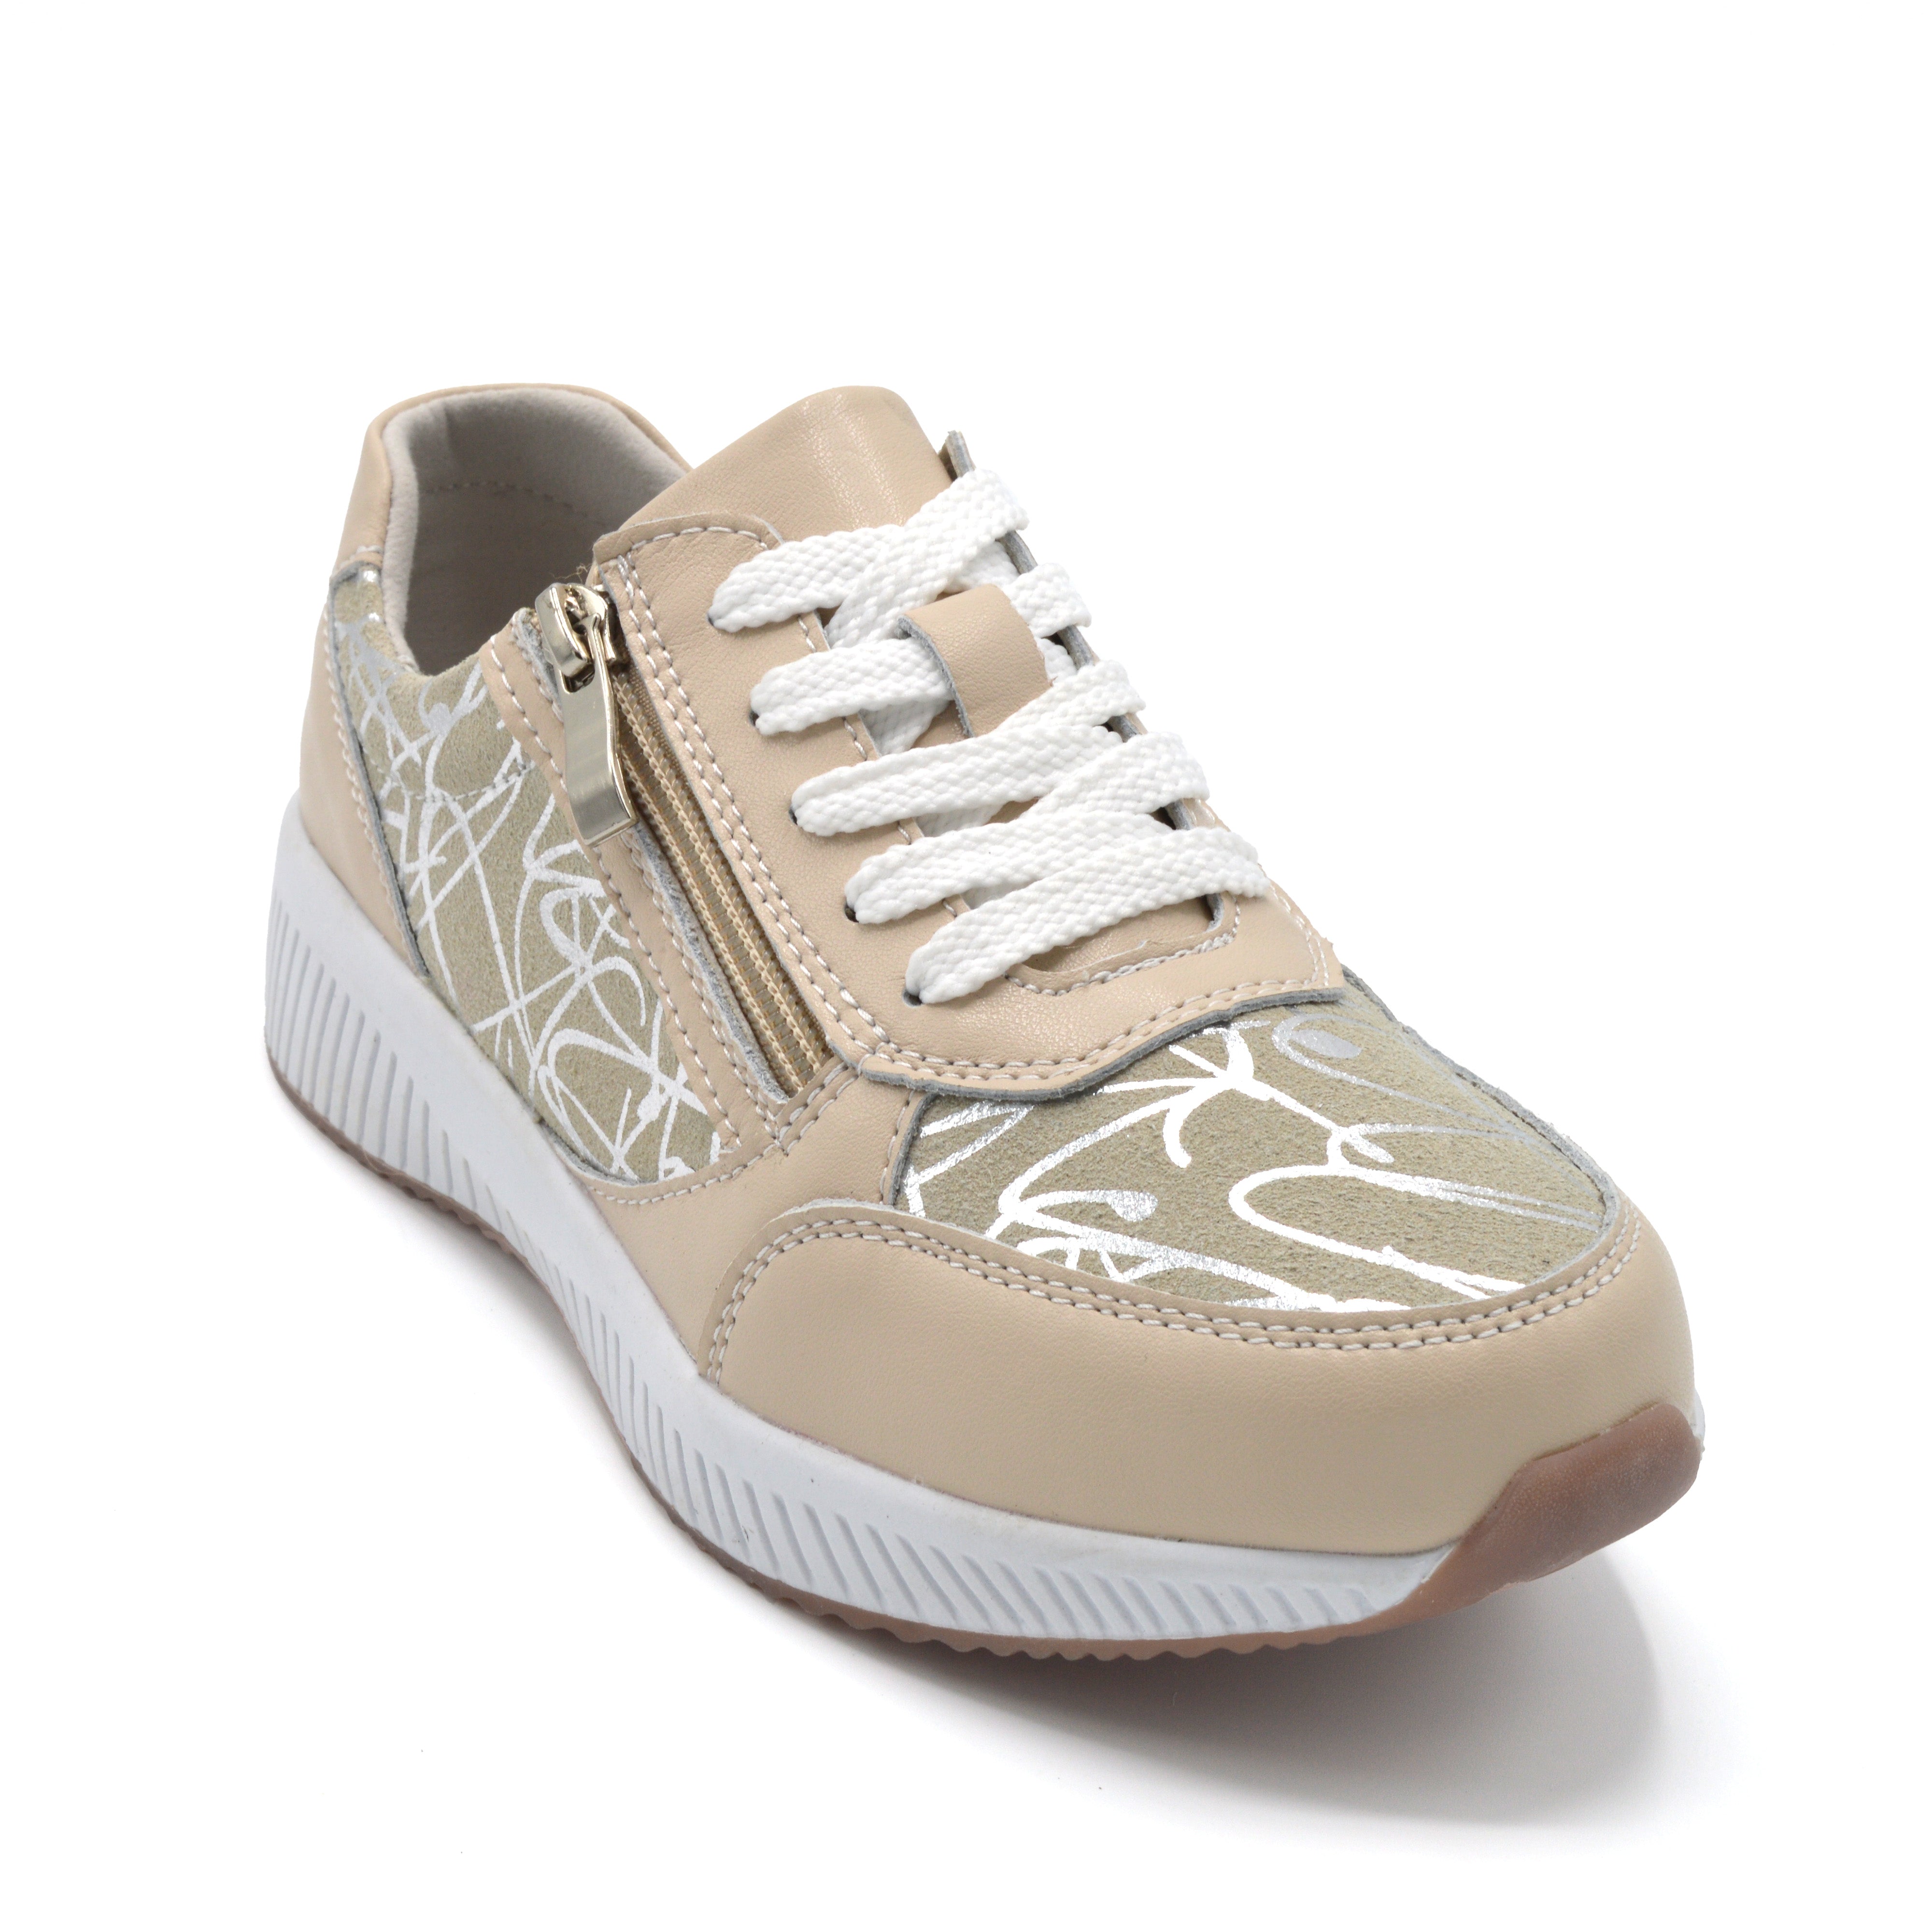 Wide Fitting Casual Zipped Trainer For Bunions